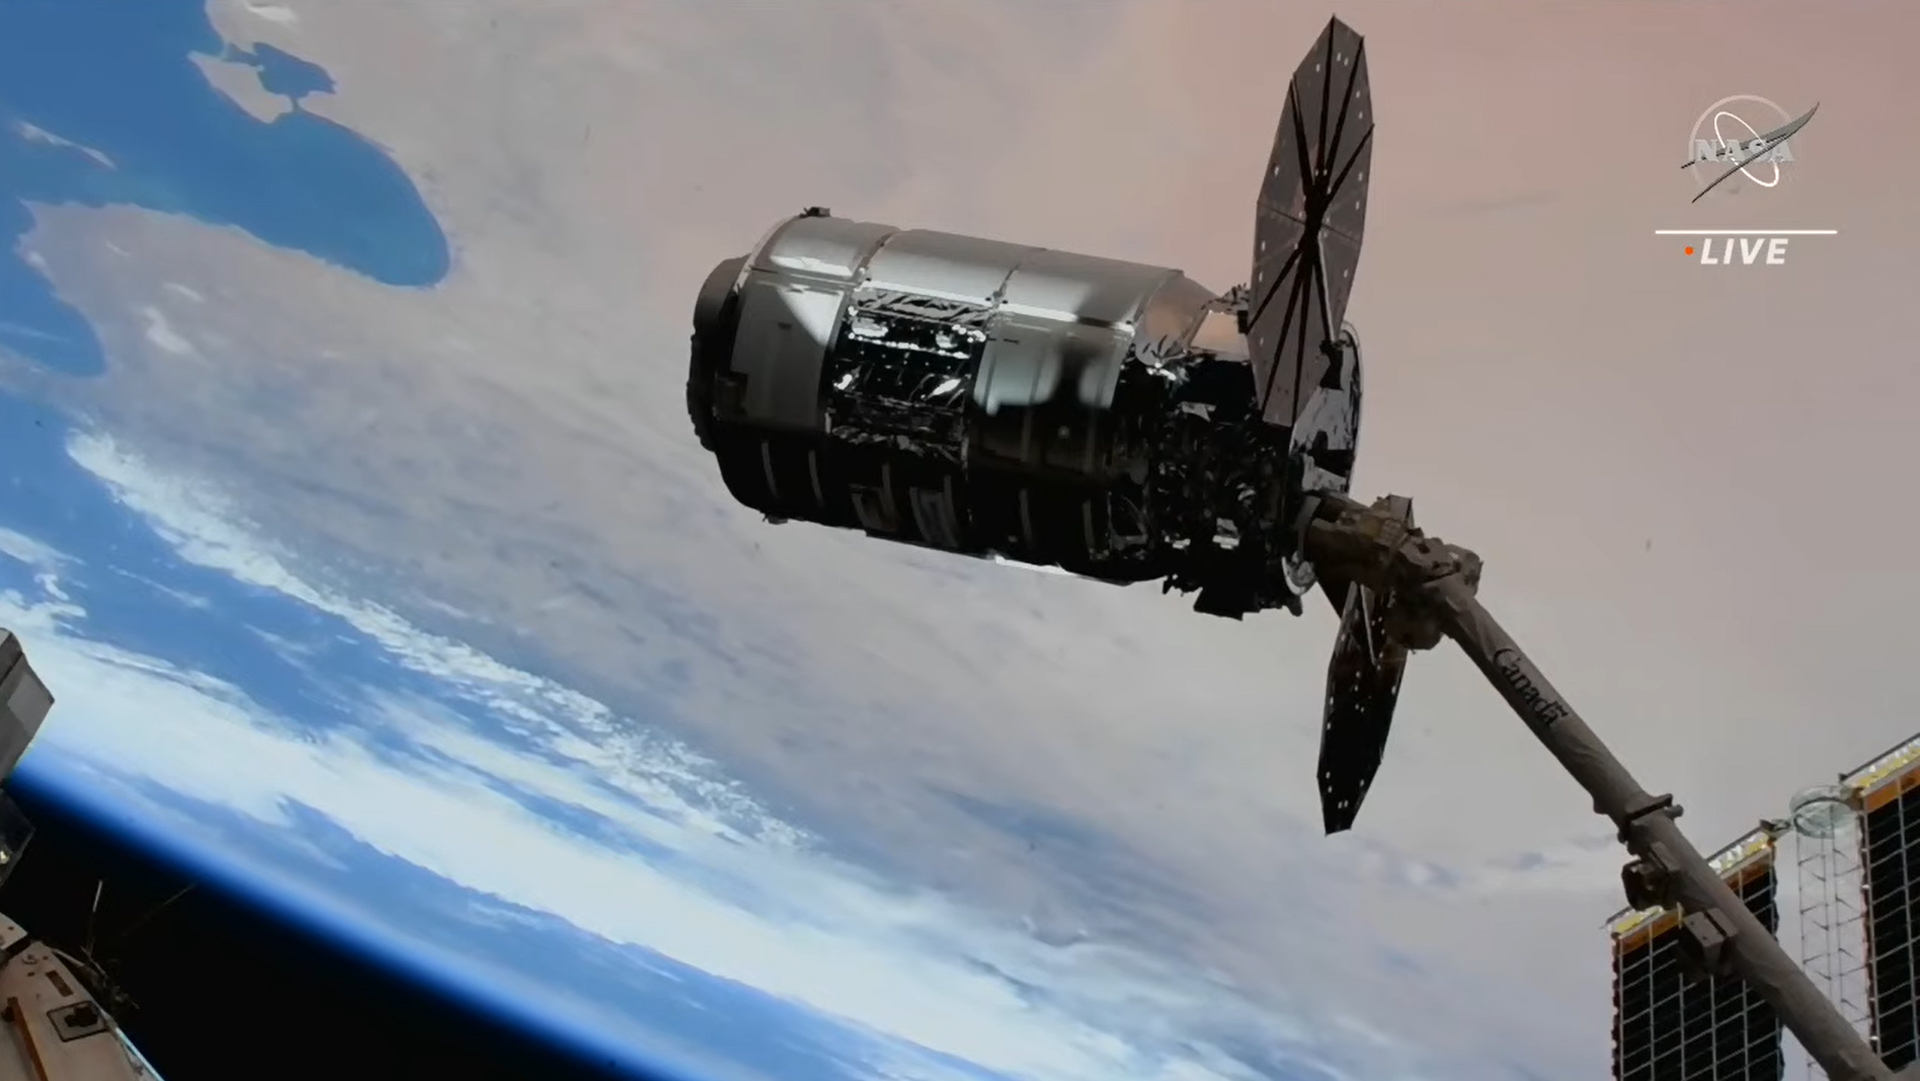 cygnus spacecraft with solar wings visible against the earth. the nasa logo is in the corner